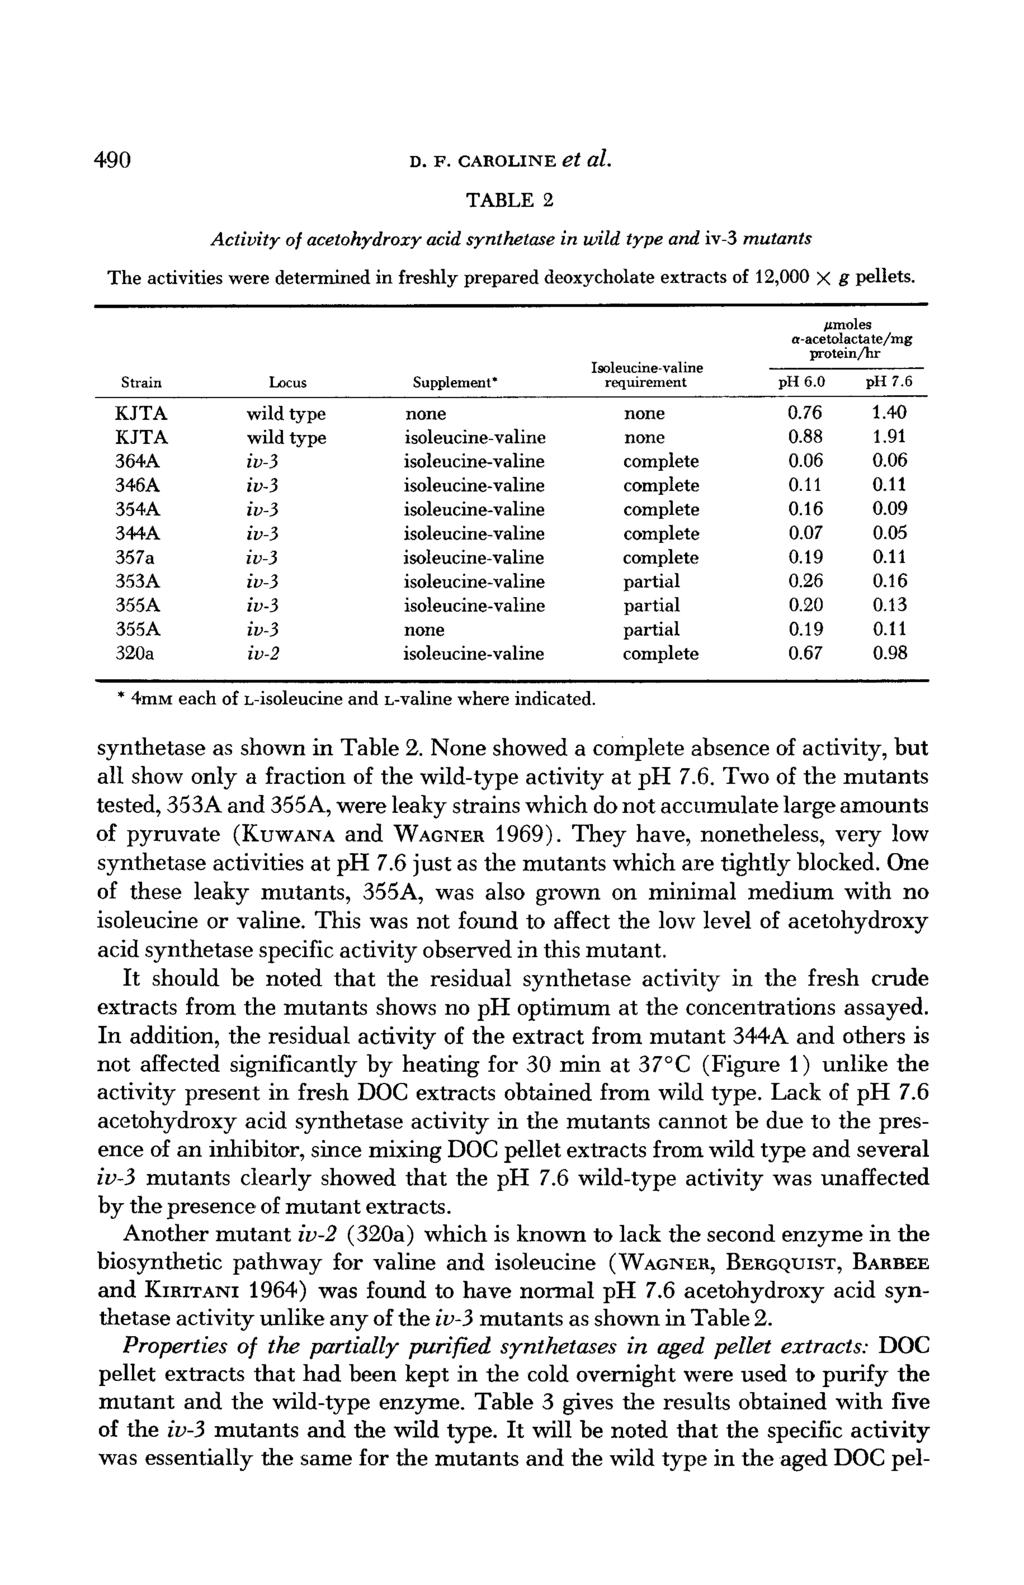 490 D. F. CAROLINE et al. TABLE 2 Activity of acetohydroxy acid synthetase in and iv-3 mutants The activities were determined in freshly prepared deoxycholate extracts of 12,000 x g pellets.